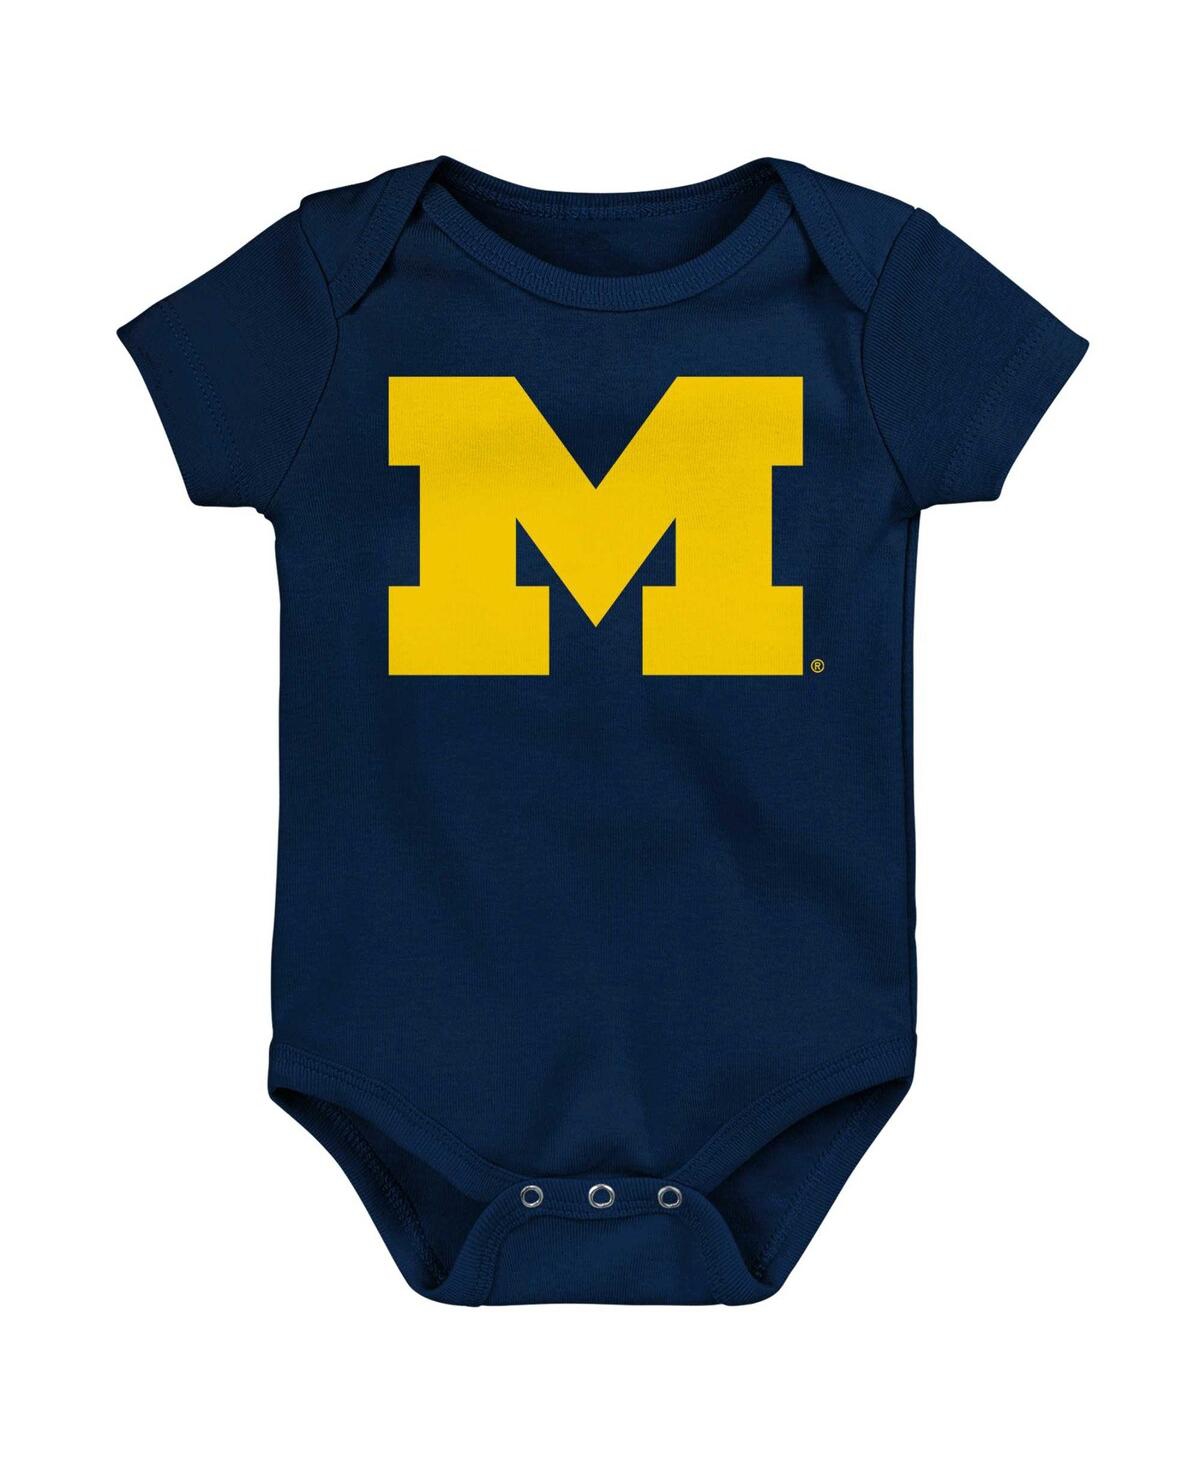 OUTERSTUFF NEWBORN AND INFANT BOYS AND GIRLS NAVY MICHIGAN WOLVERINES STANDING LOGO BODYSUIT